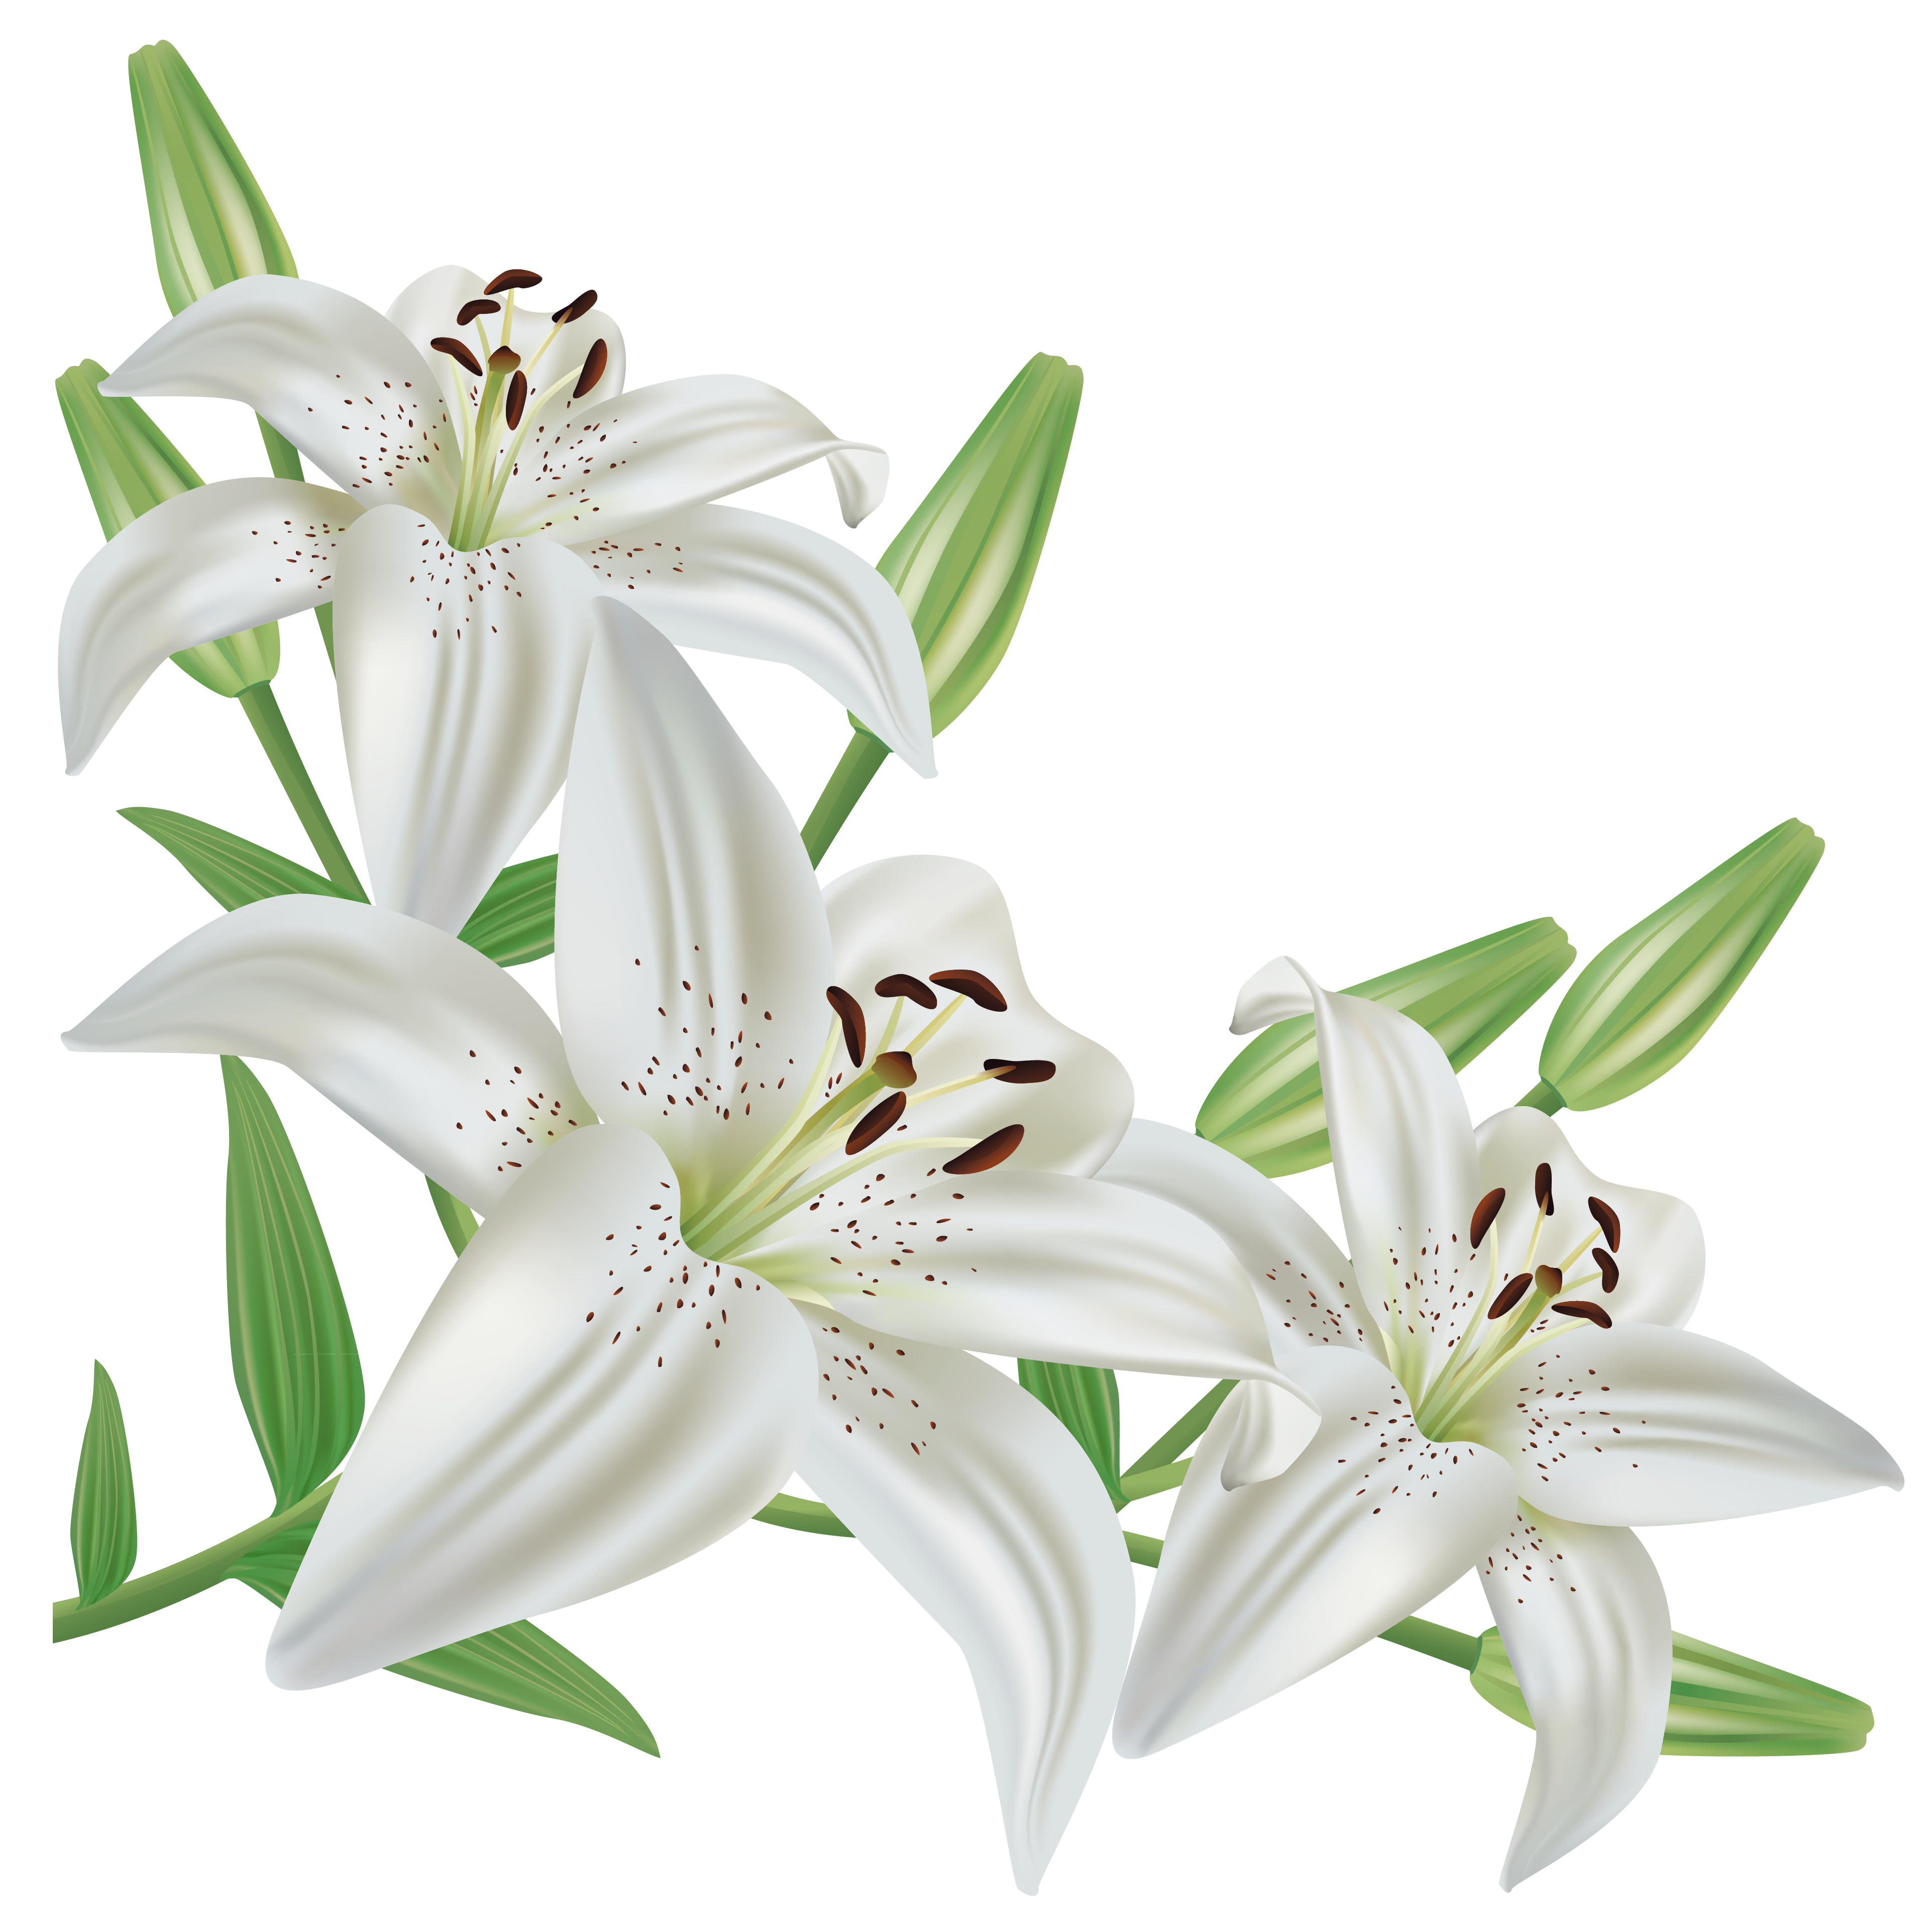 lily clipart cut flower